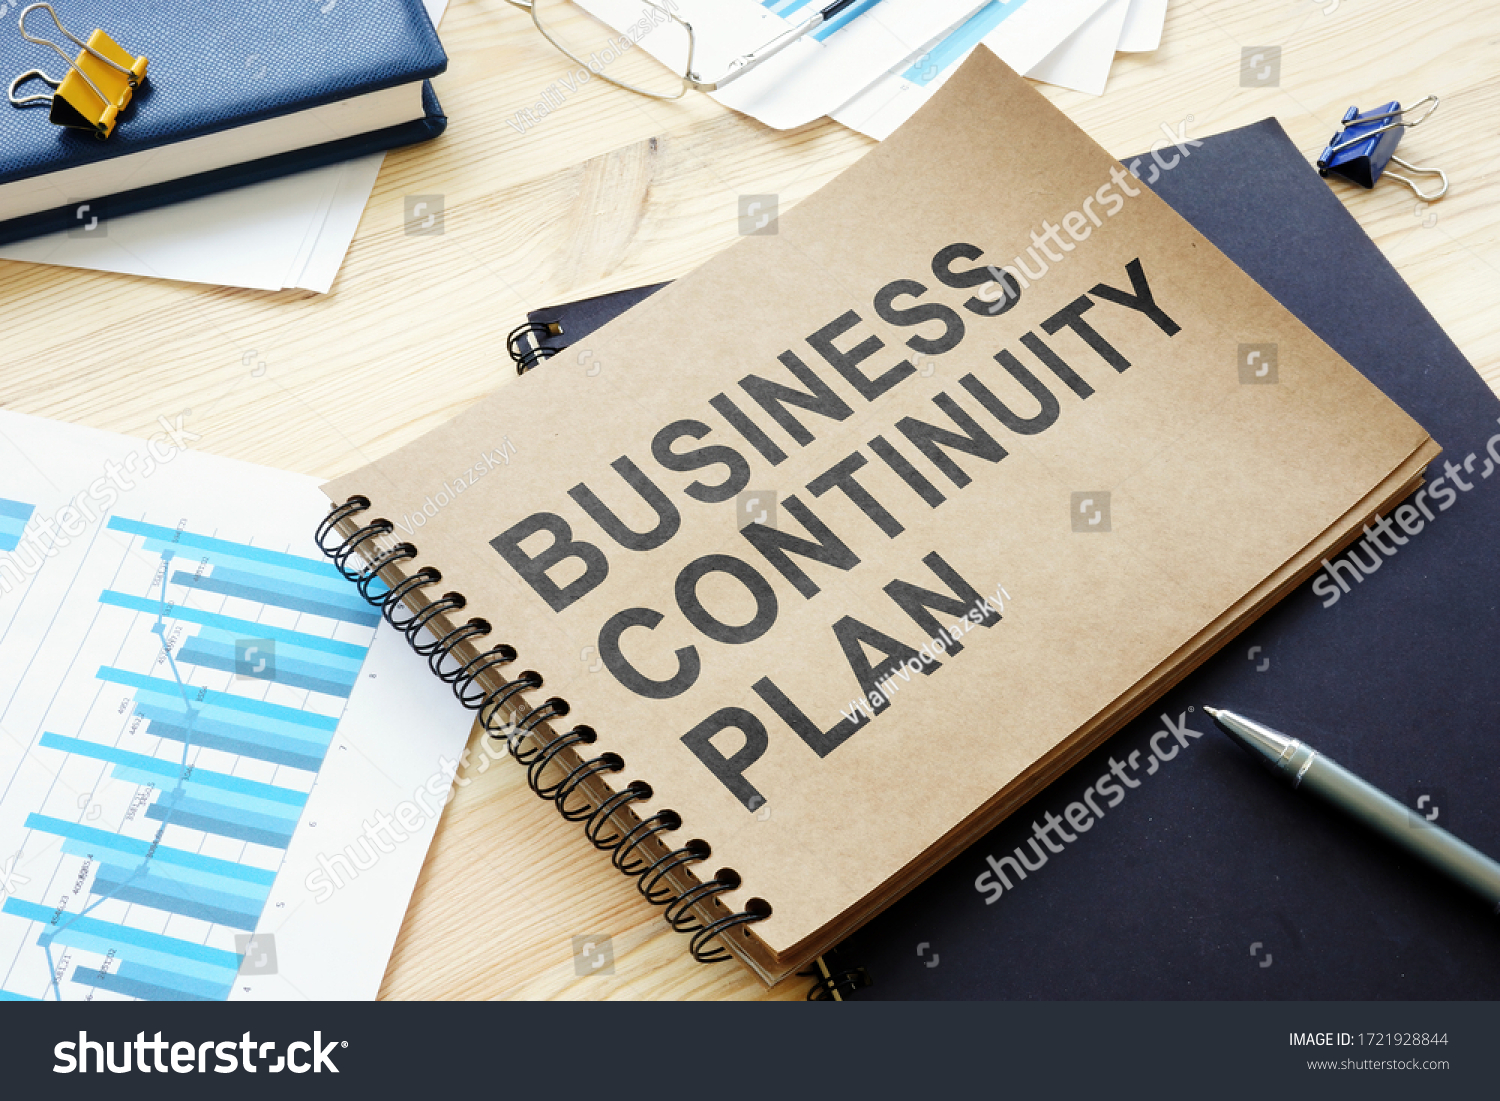 BCP Business continuity plan is on the table. #1721928844